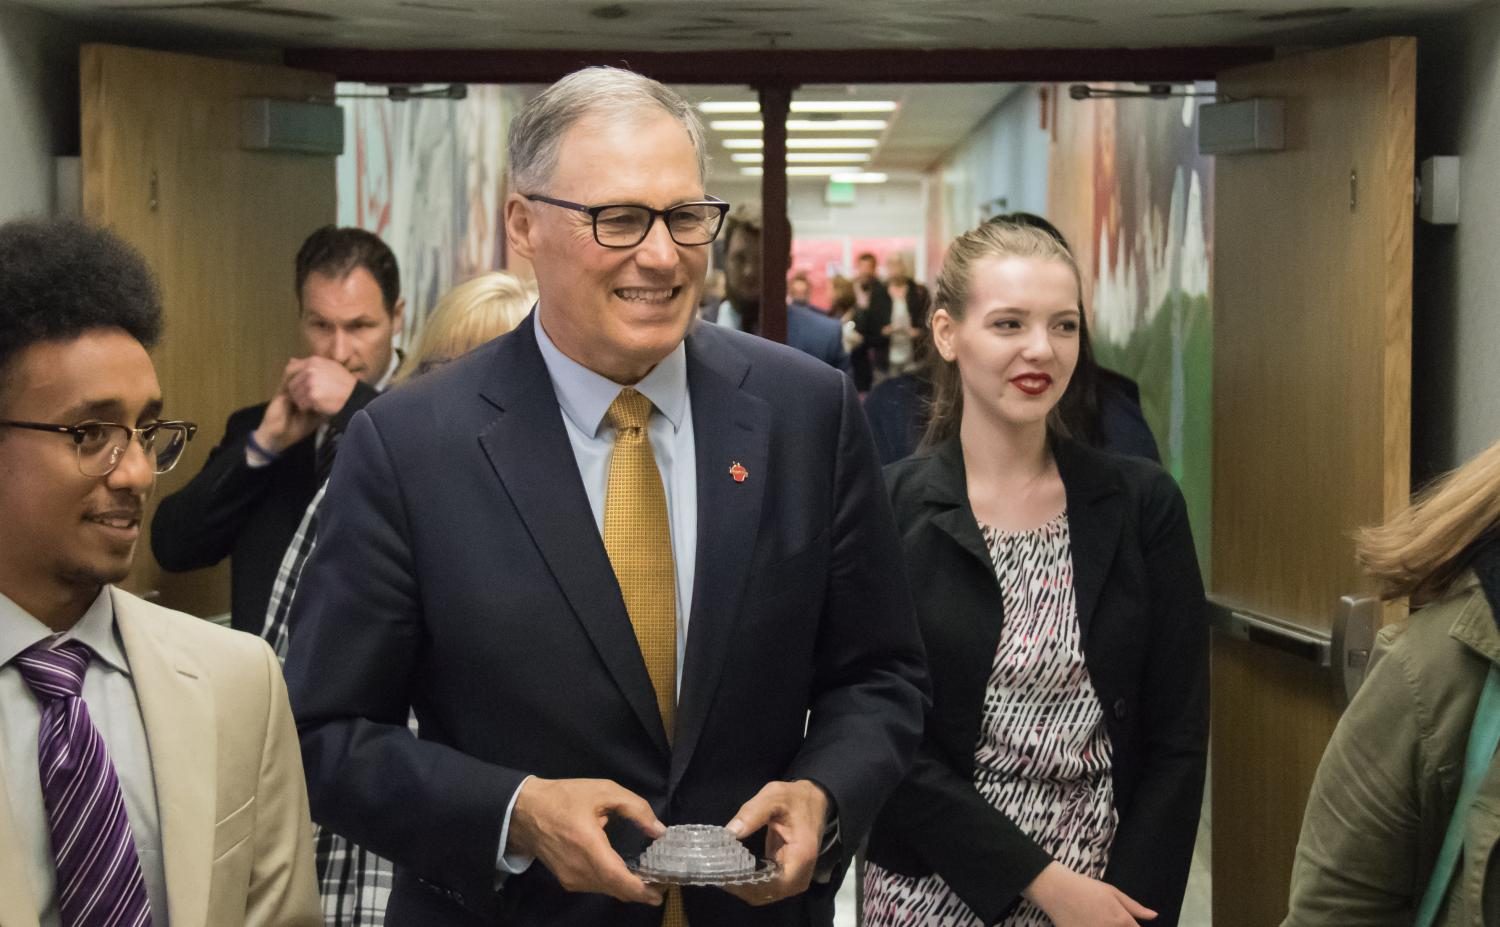 Governor Inslee exits the Art and Technology wing accompanied by seniors Elizabeth Jurgensen and Natu Abraham.